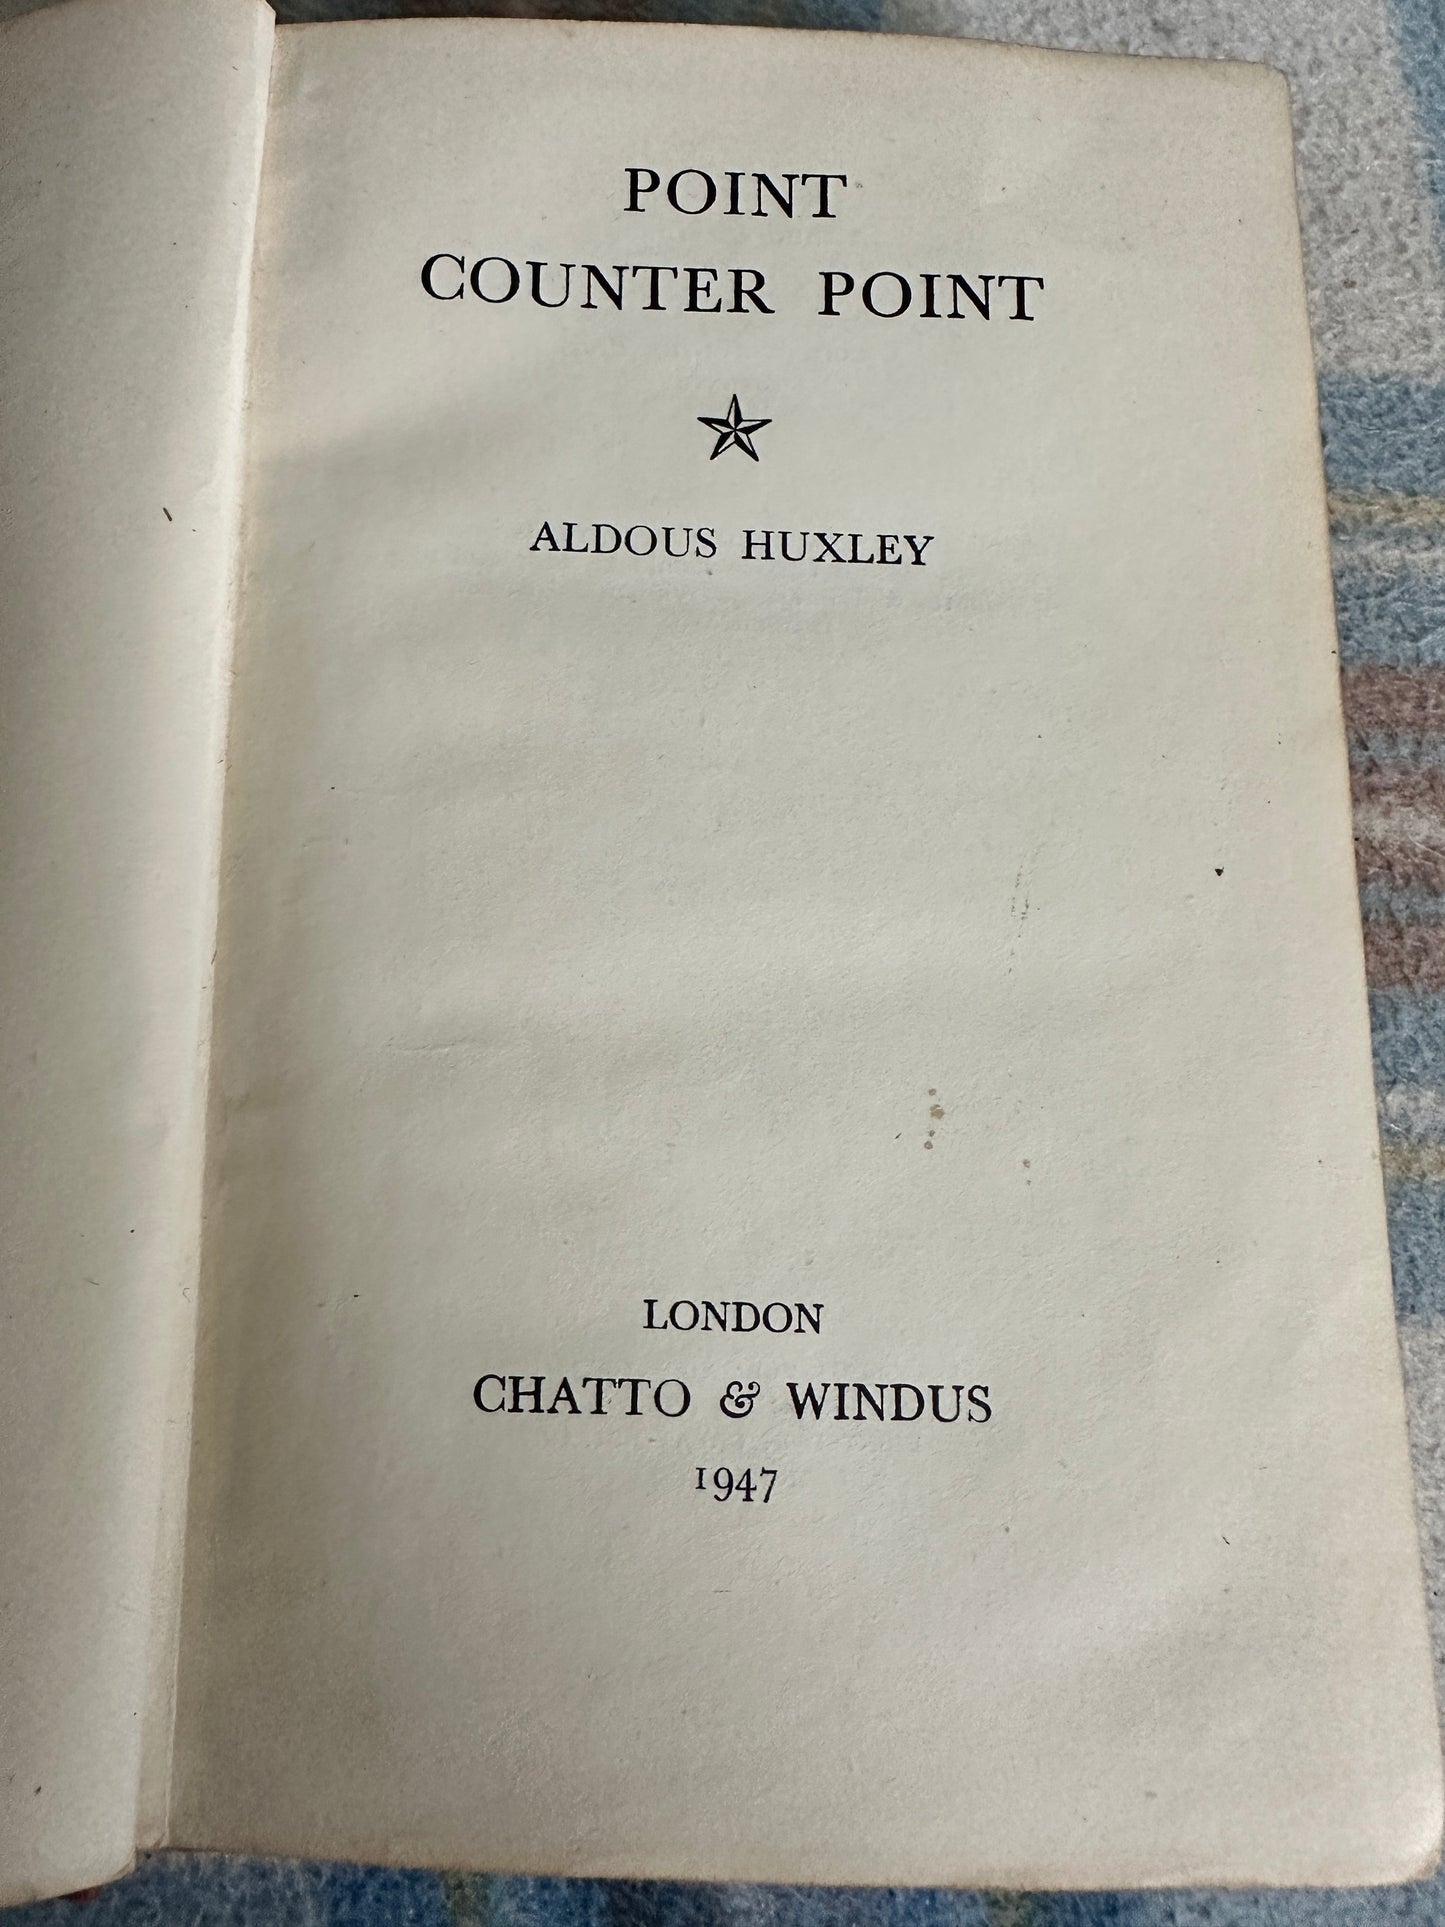 1947 Point Counter Point - Aldous Huxley(Chatto & Windus)